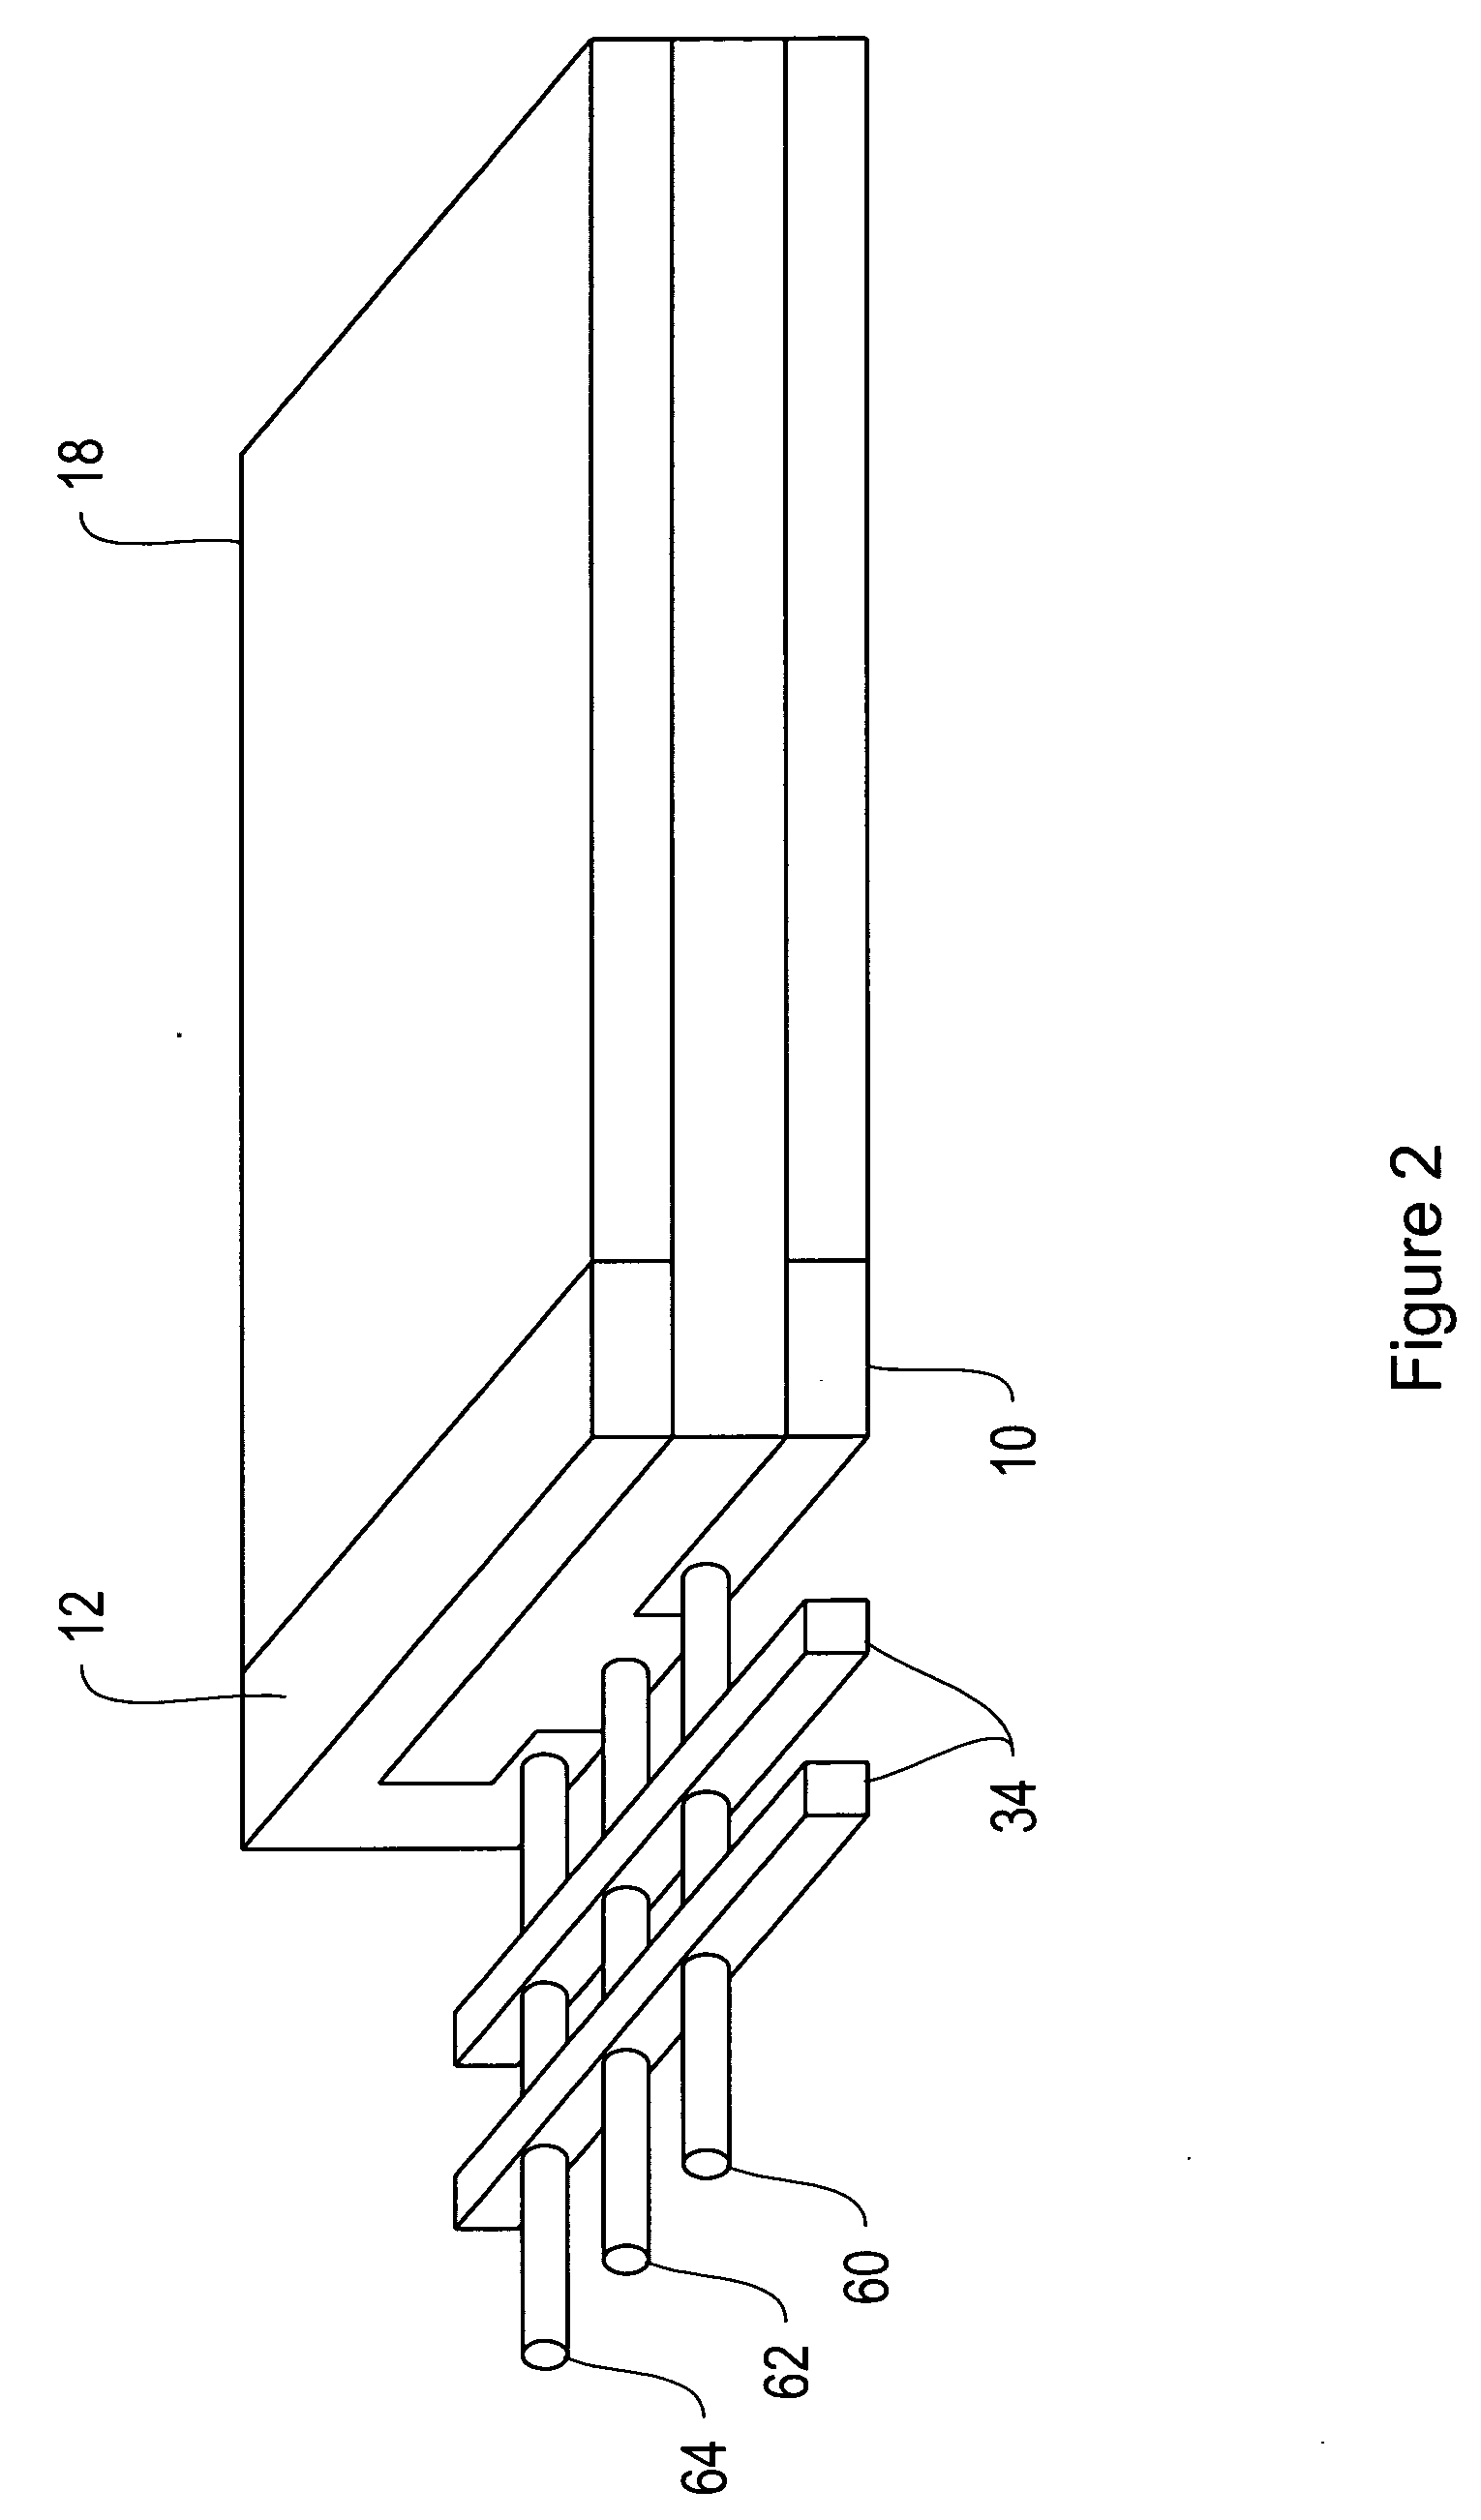 Fuel cell apparatus and methods